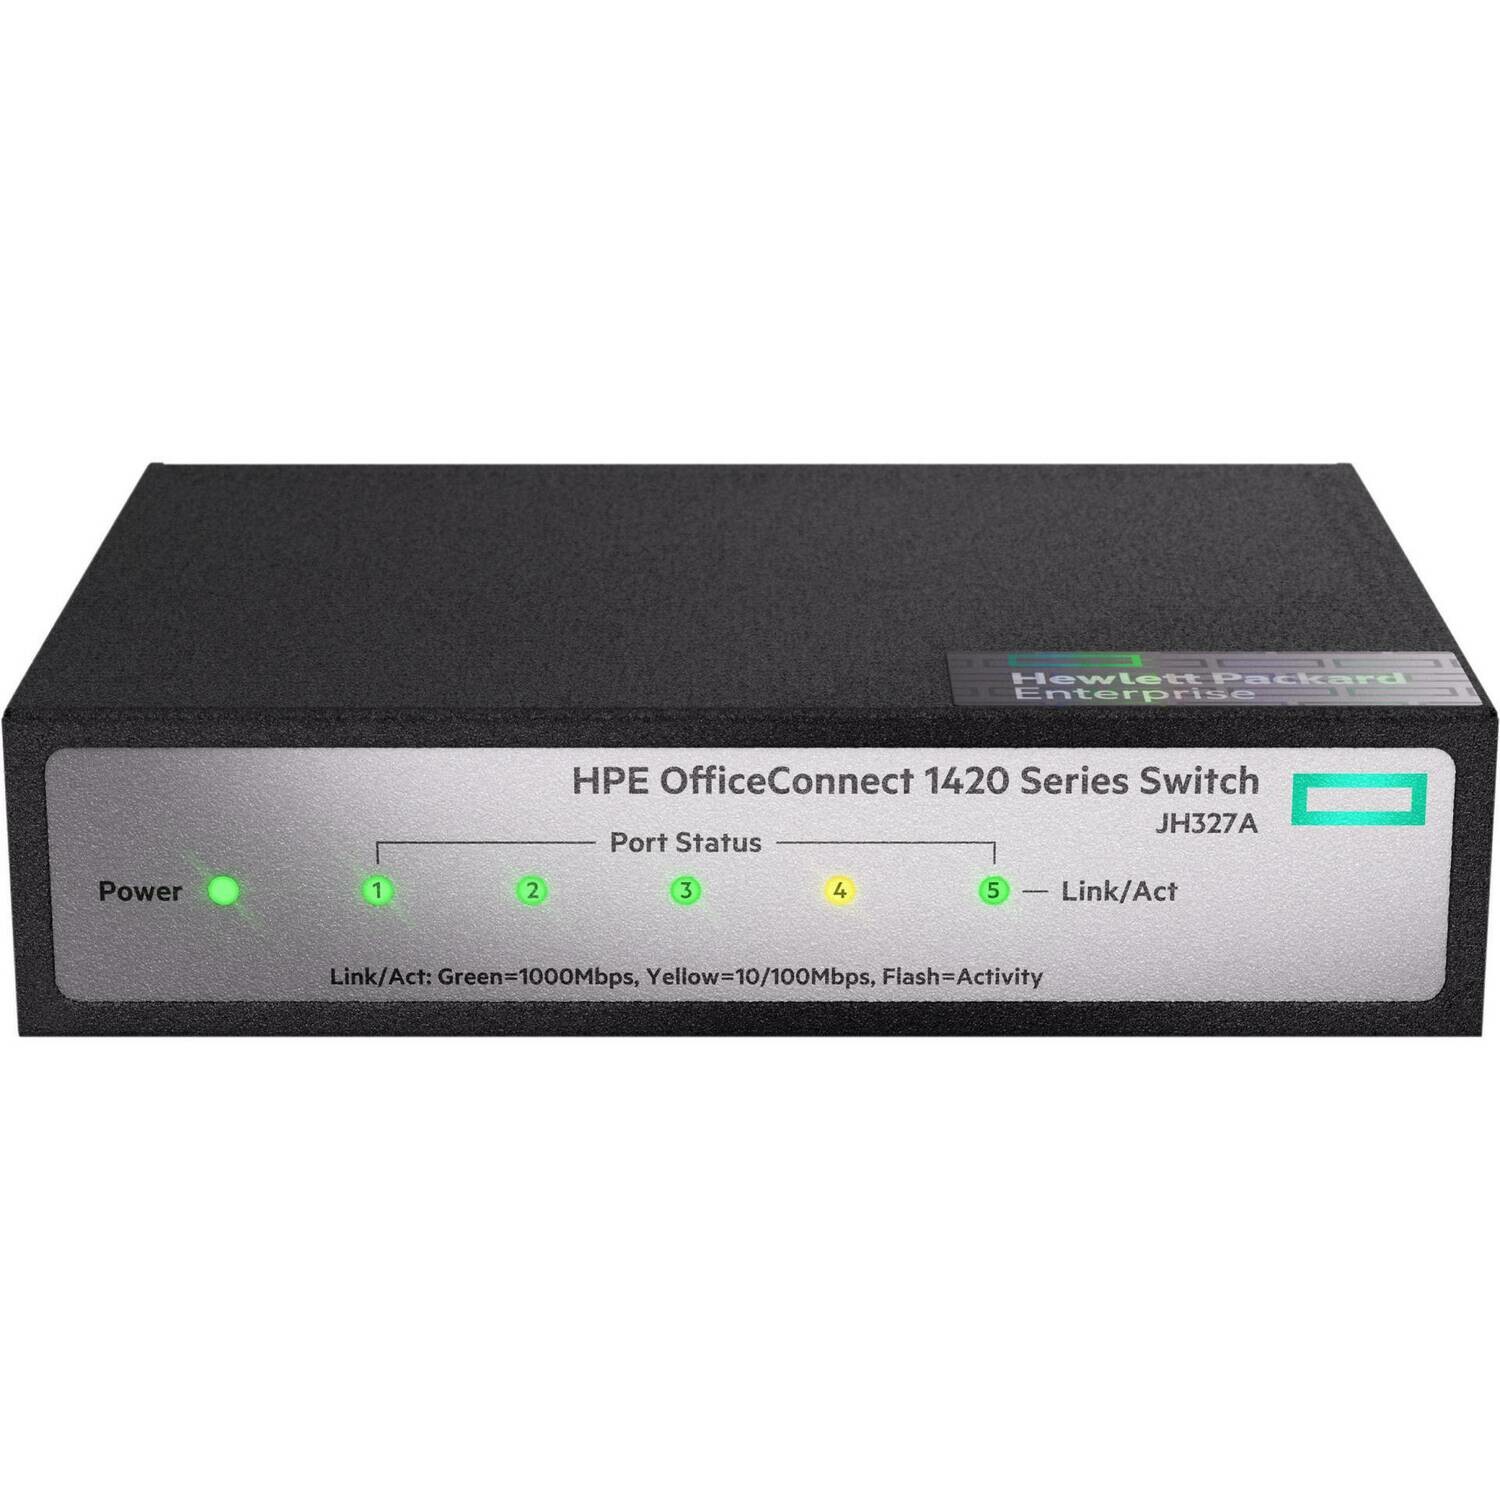 HPE OfficeConnect 1420 5G Unmanaged Switch